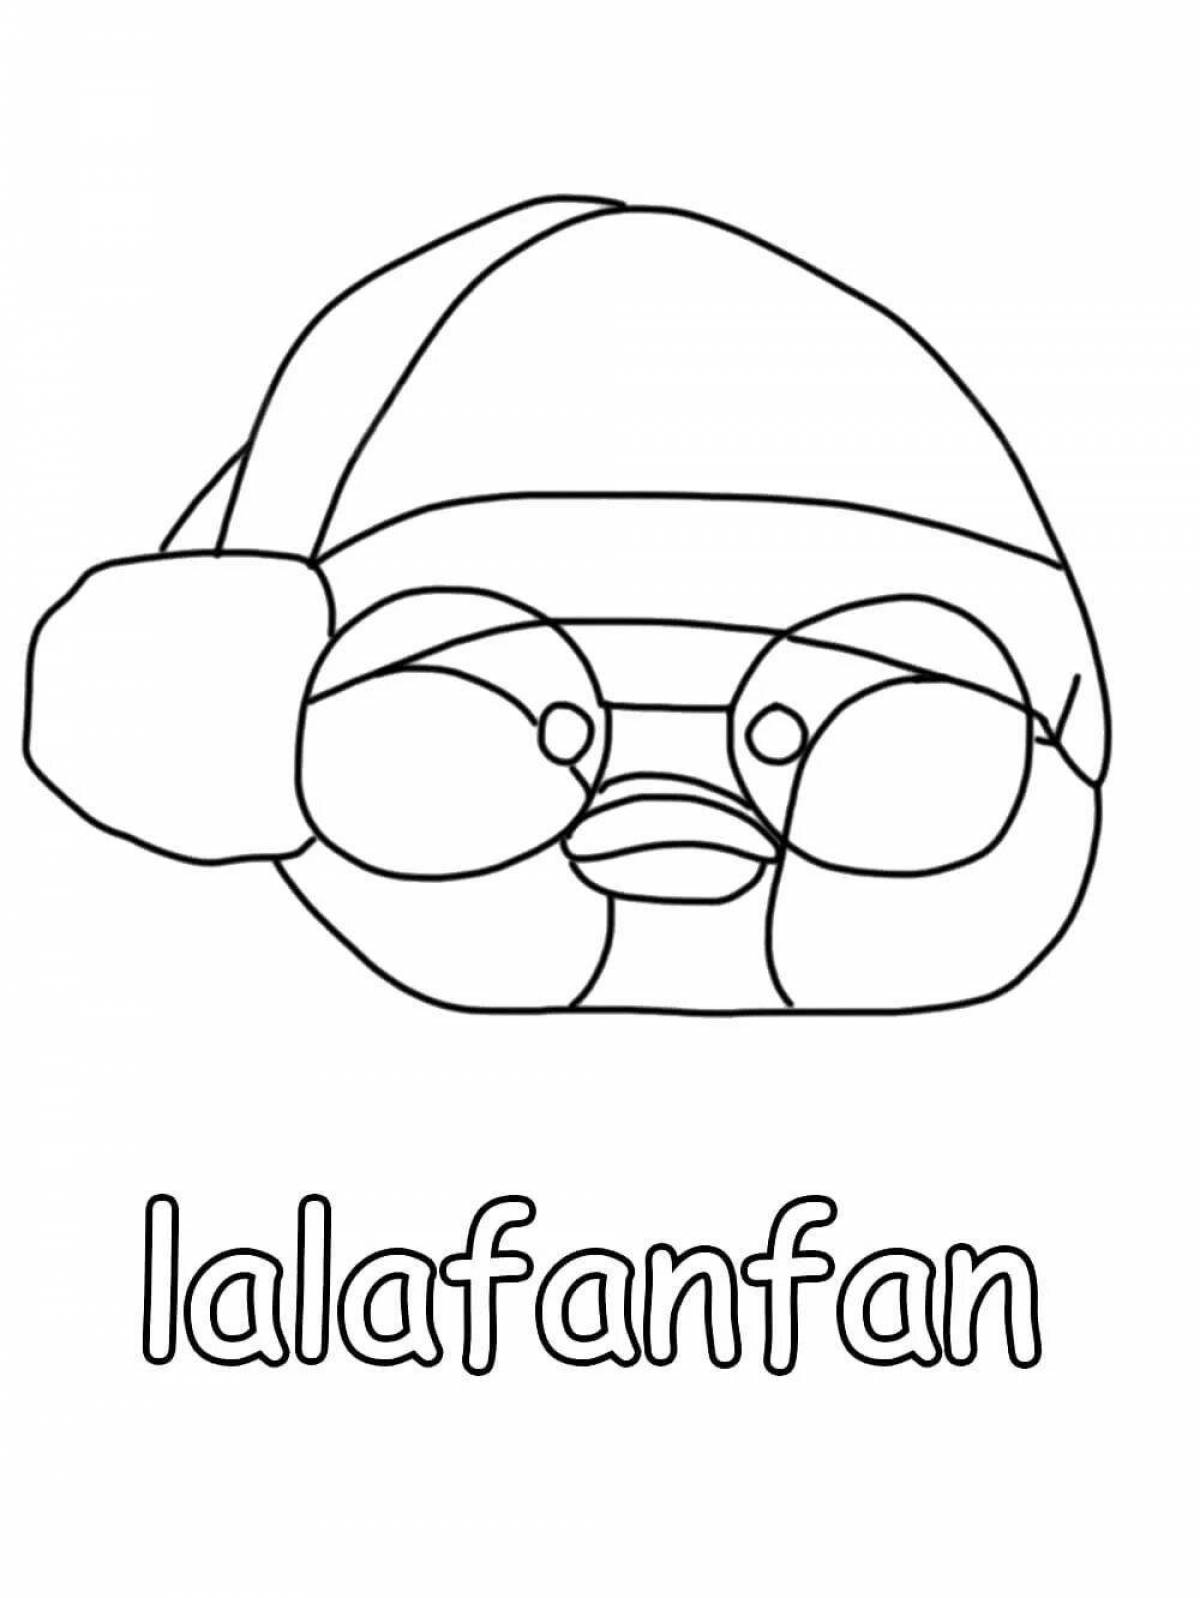 Amazing lola fanfan duck coloring page